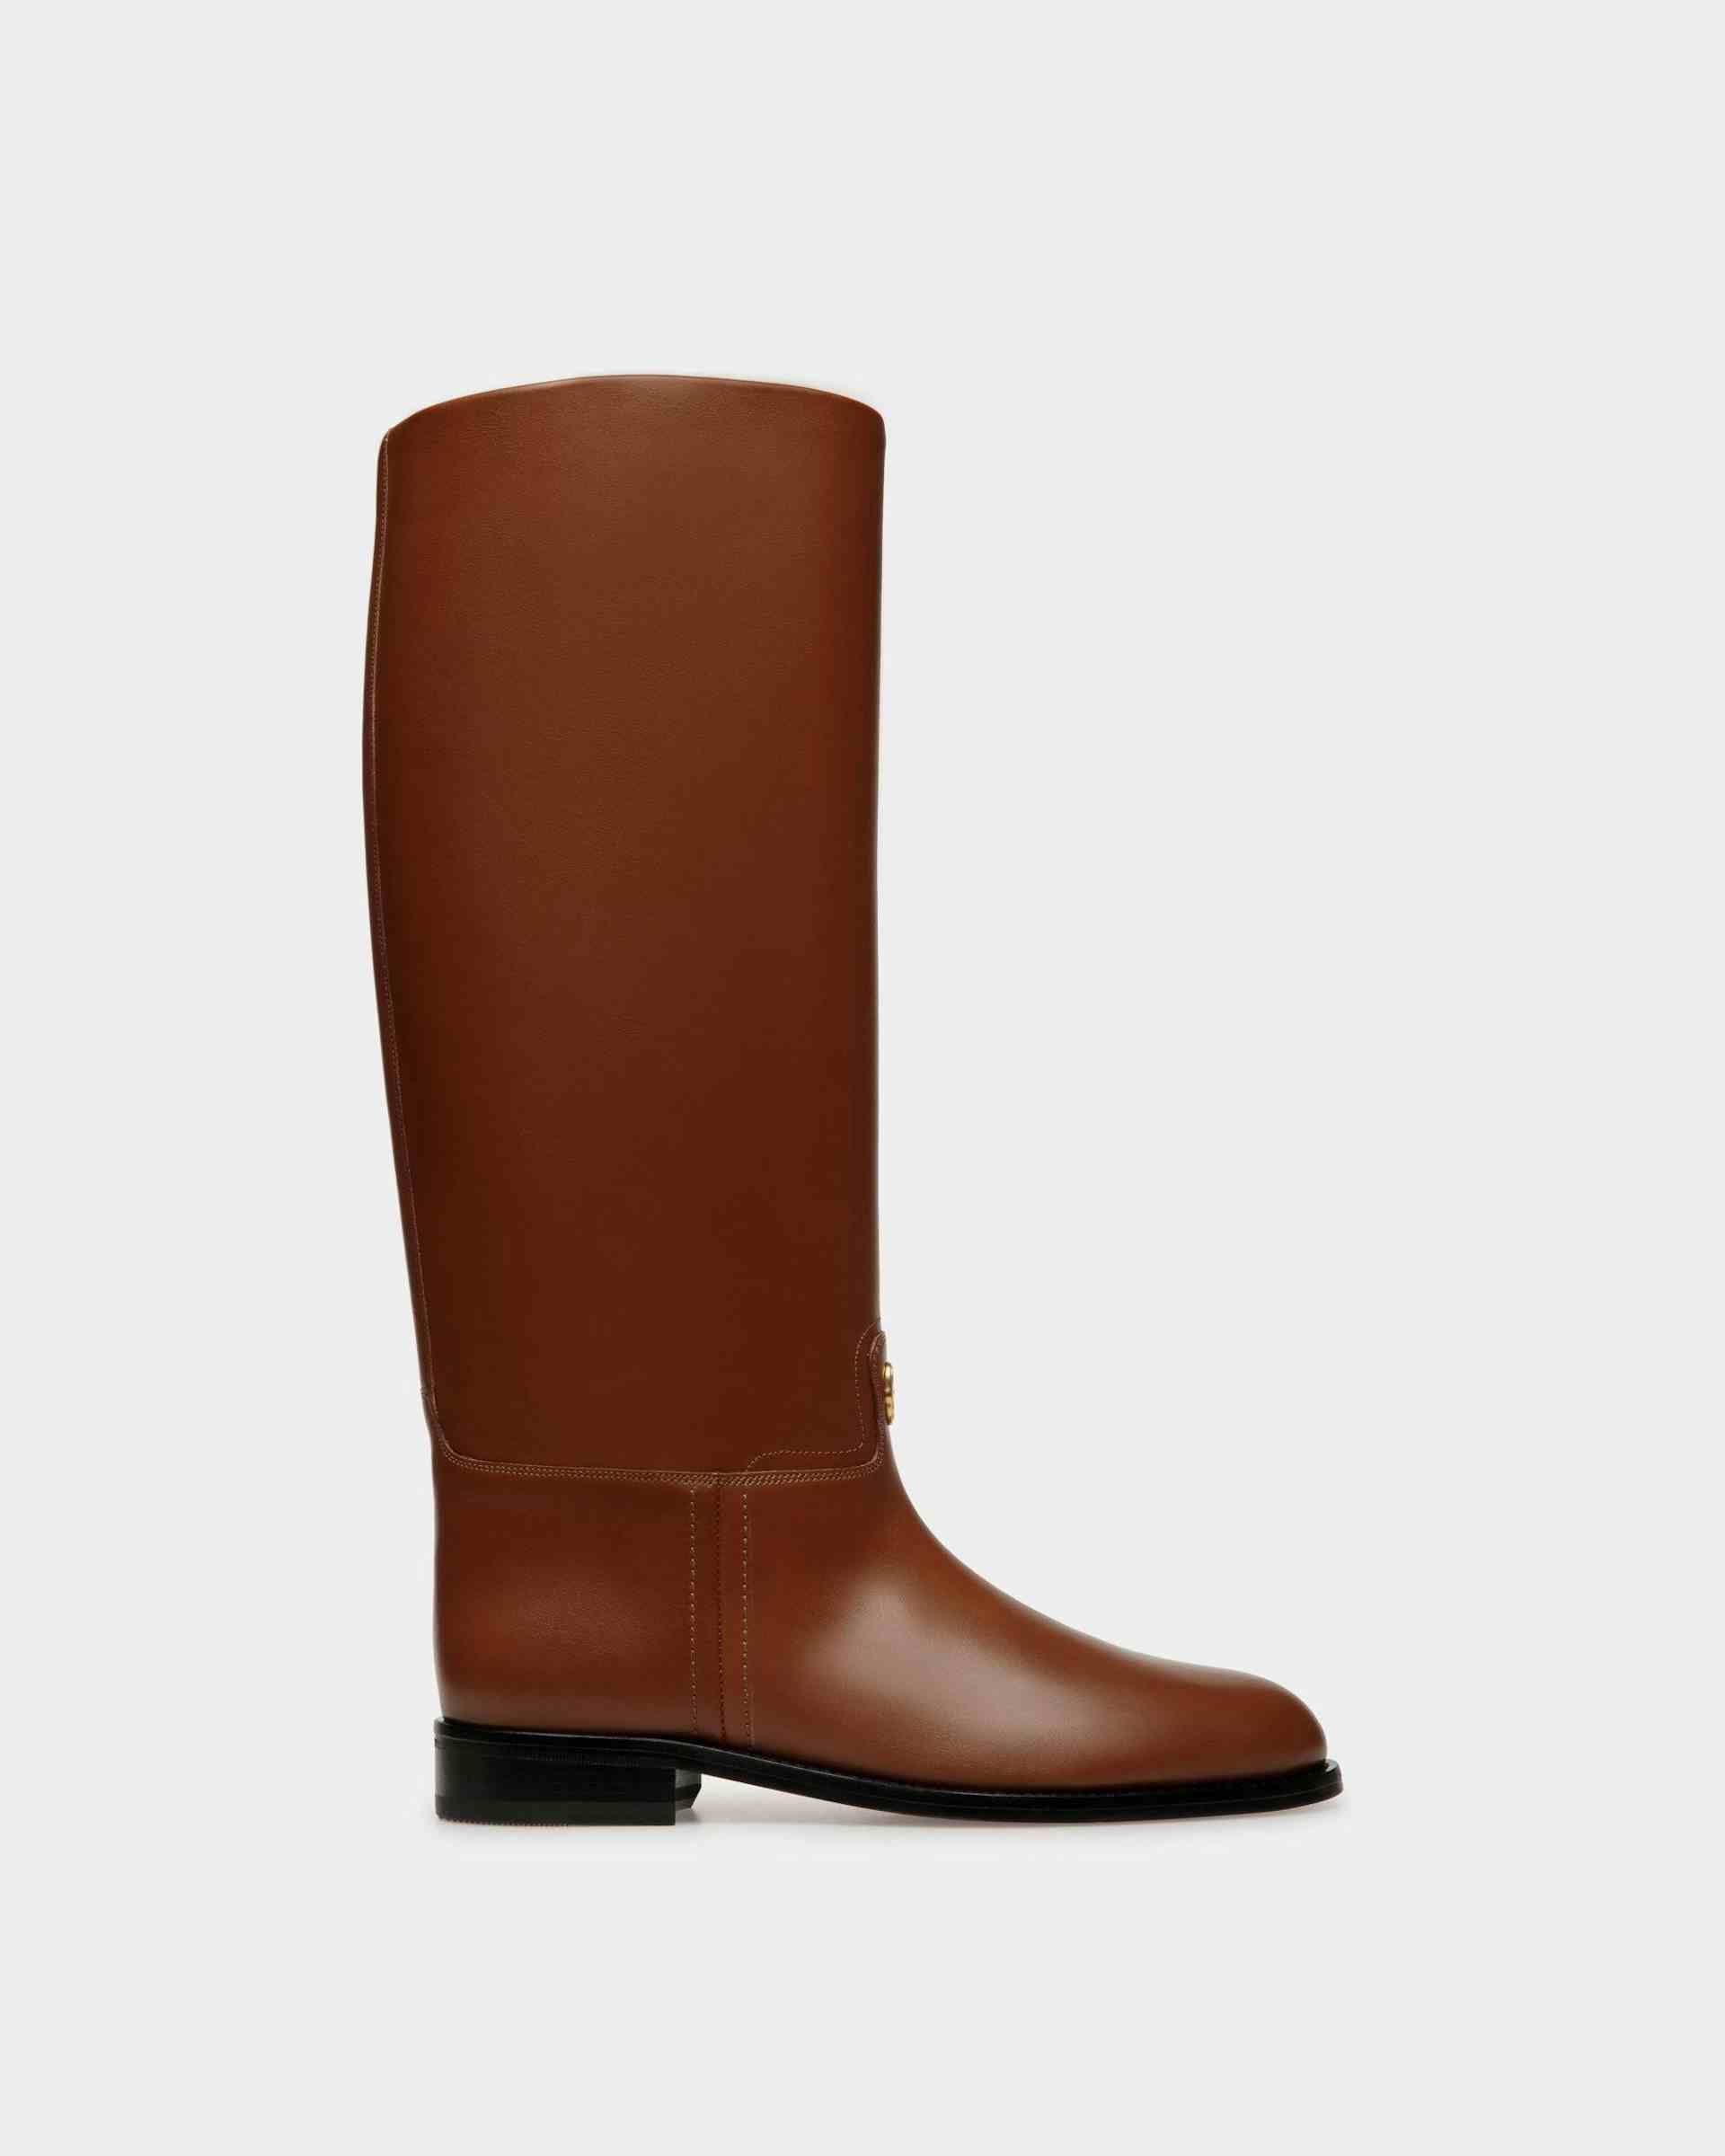 Huntington Long Boots In Brown Leather - Women's - Bally